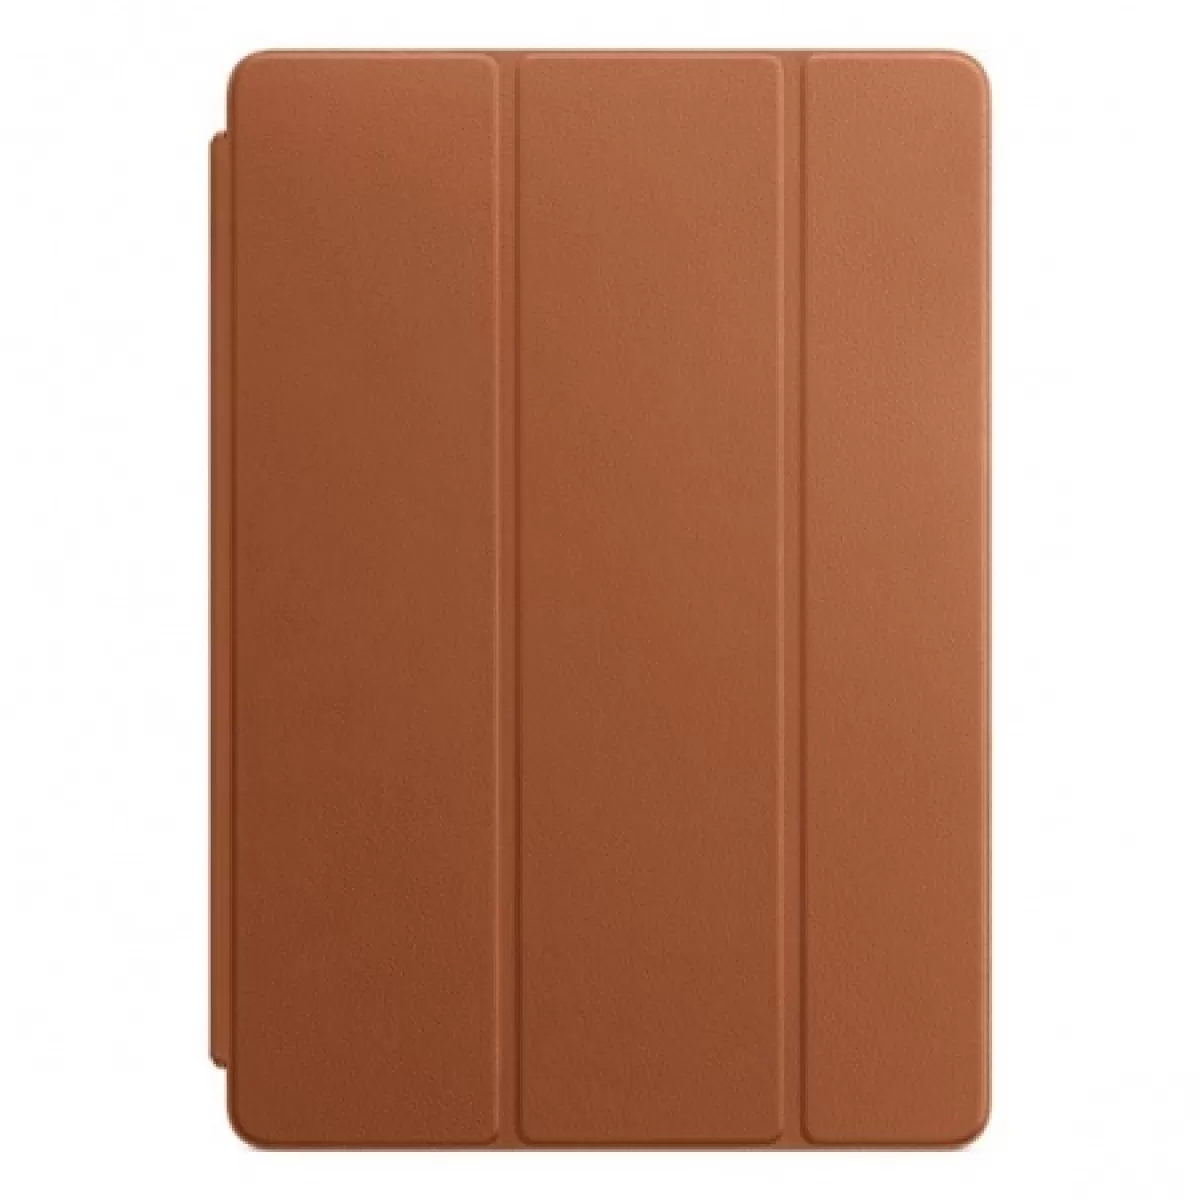 Apple Leather Smart Cover for 10.5inch iPad Pro Saddle Brown